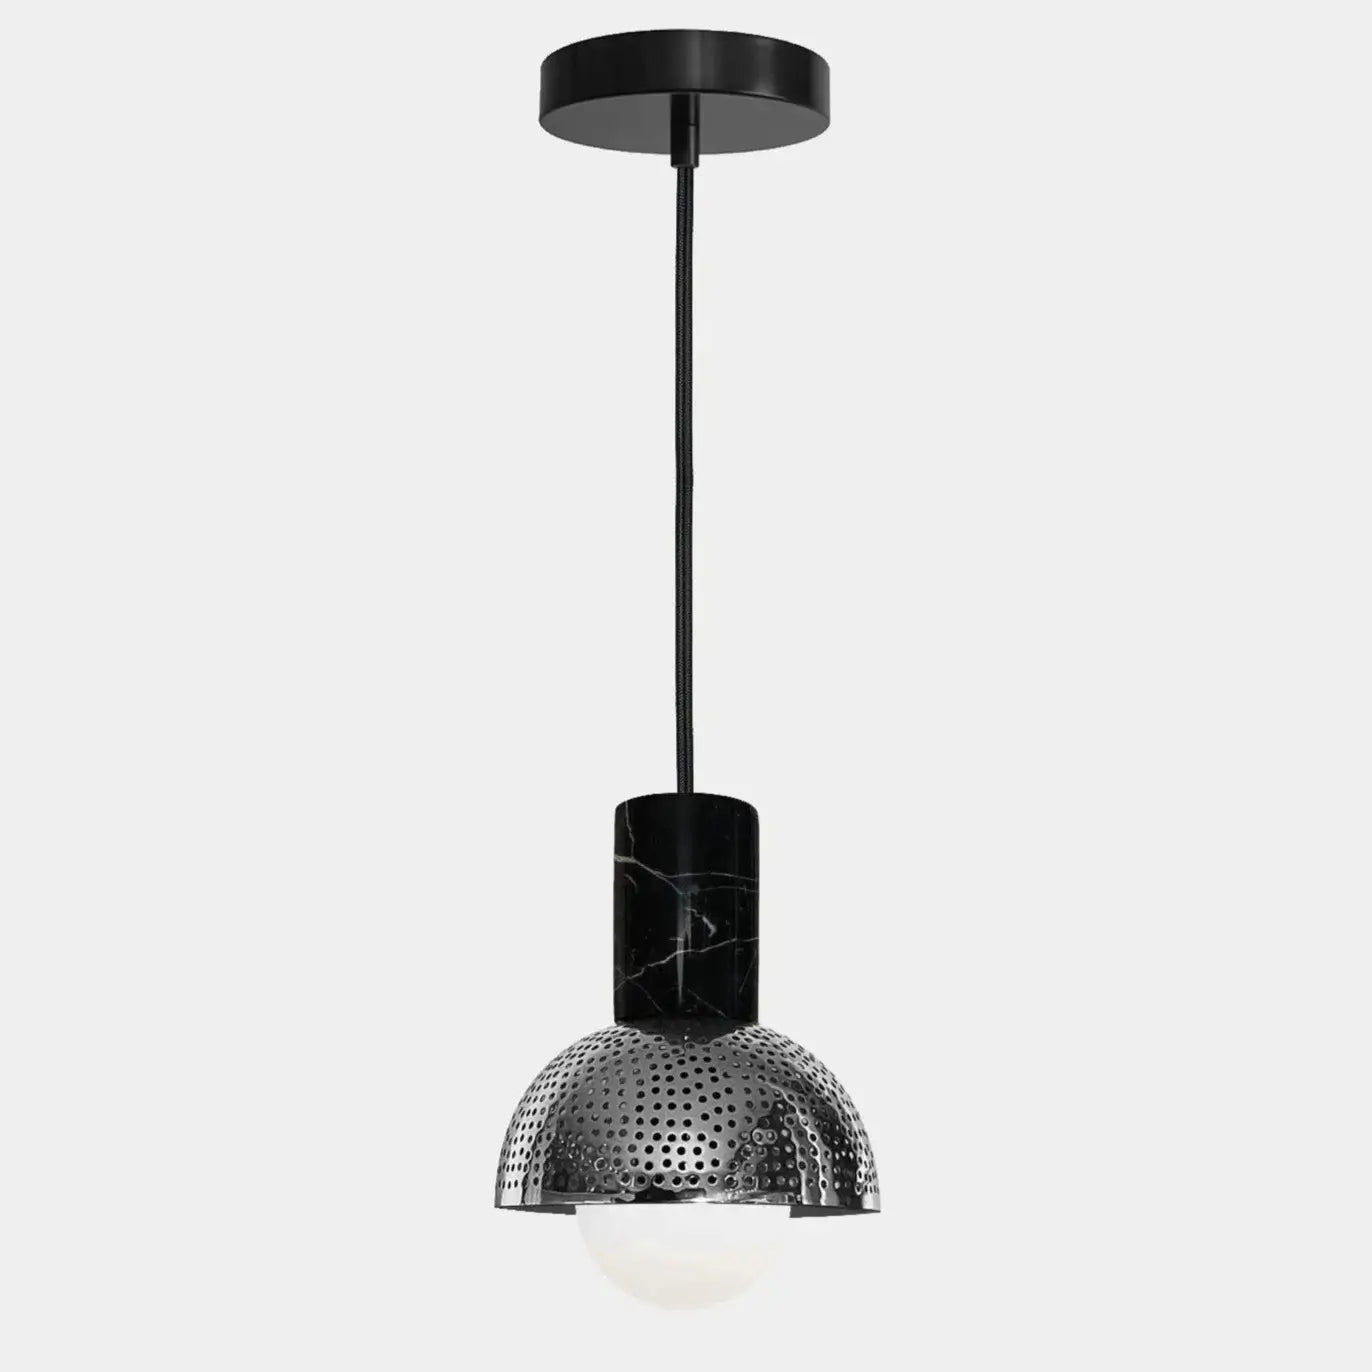 Dounia home Pendant light in nickel silver  made of Metal, Model: maria marble dome